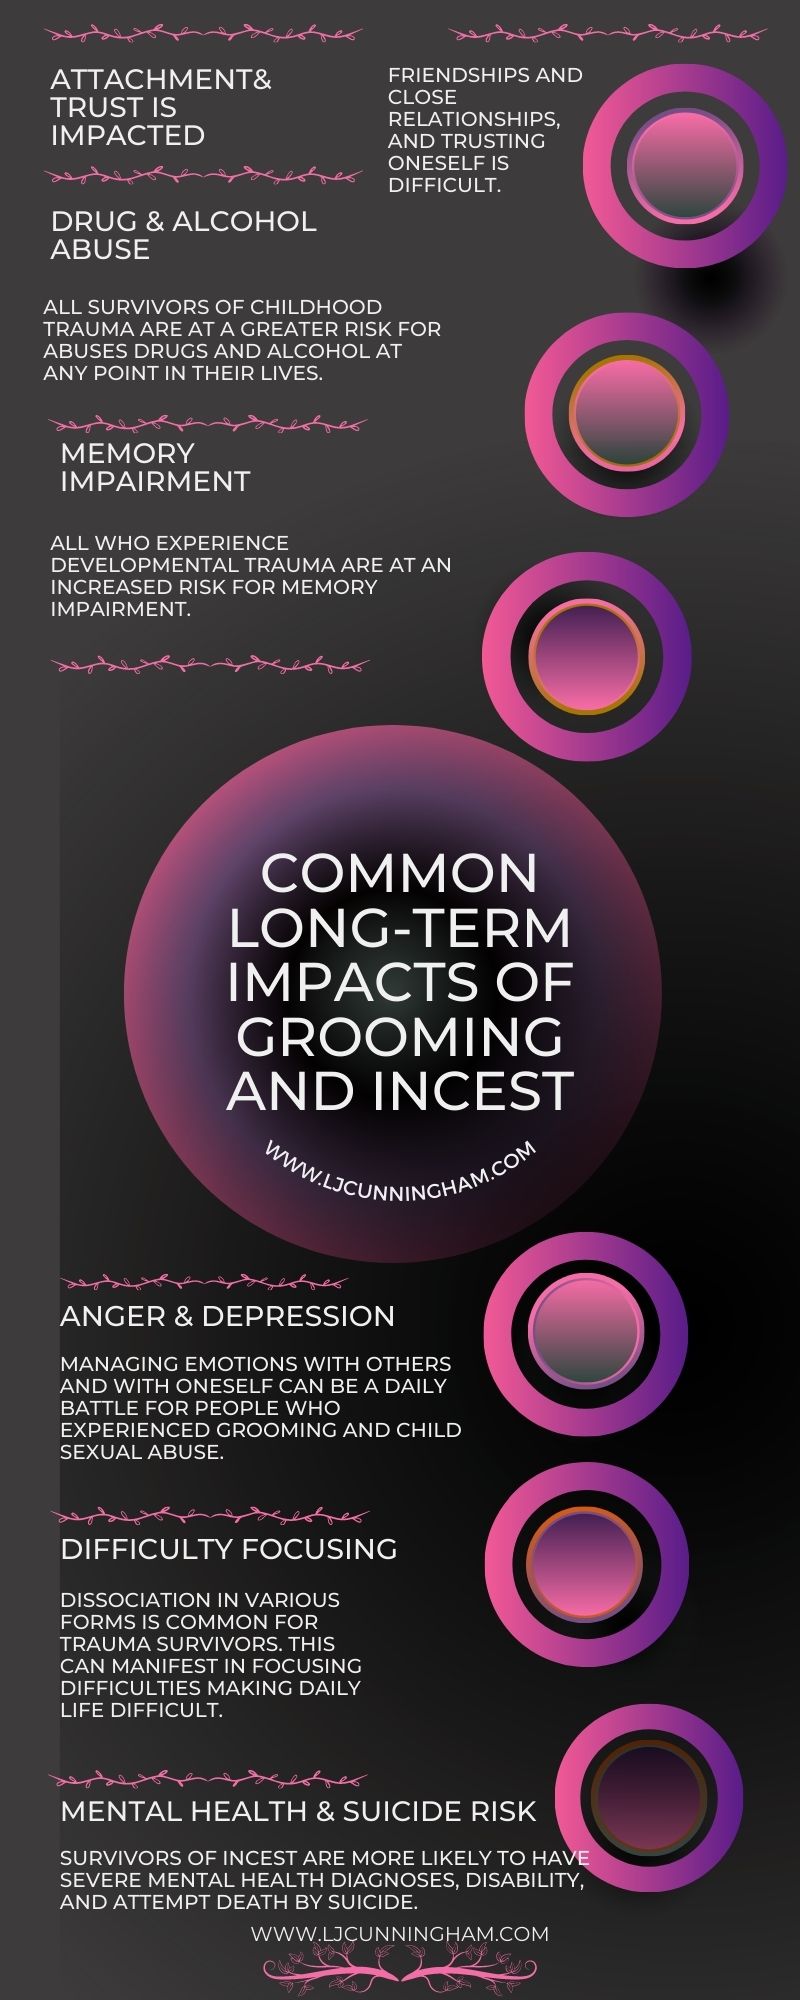 Infographic in black, white and shades of pink. common long term impacts of grooming and incest is in white lettering centered around a pink and black faded circle. from that top and bottom are highlights such as, from top: attachment and trust is impacted; drug and alcohol use is likely, memory impairment, anger and depression, difficulty focusing, mental health and death by suicide risk